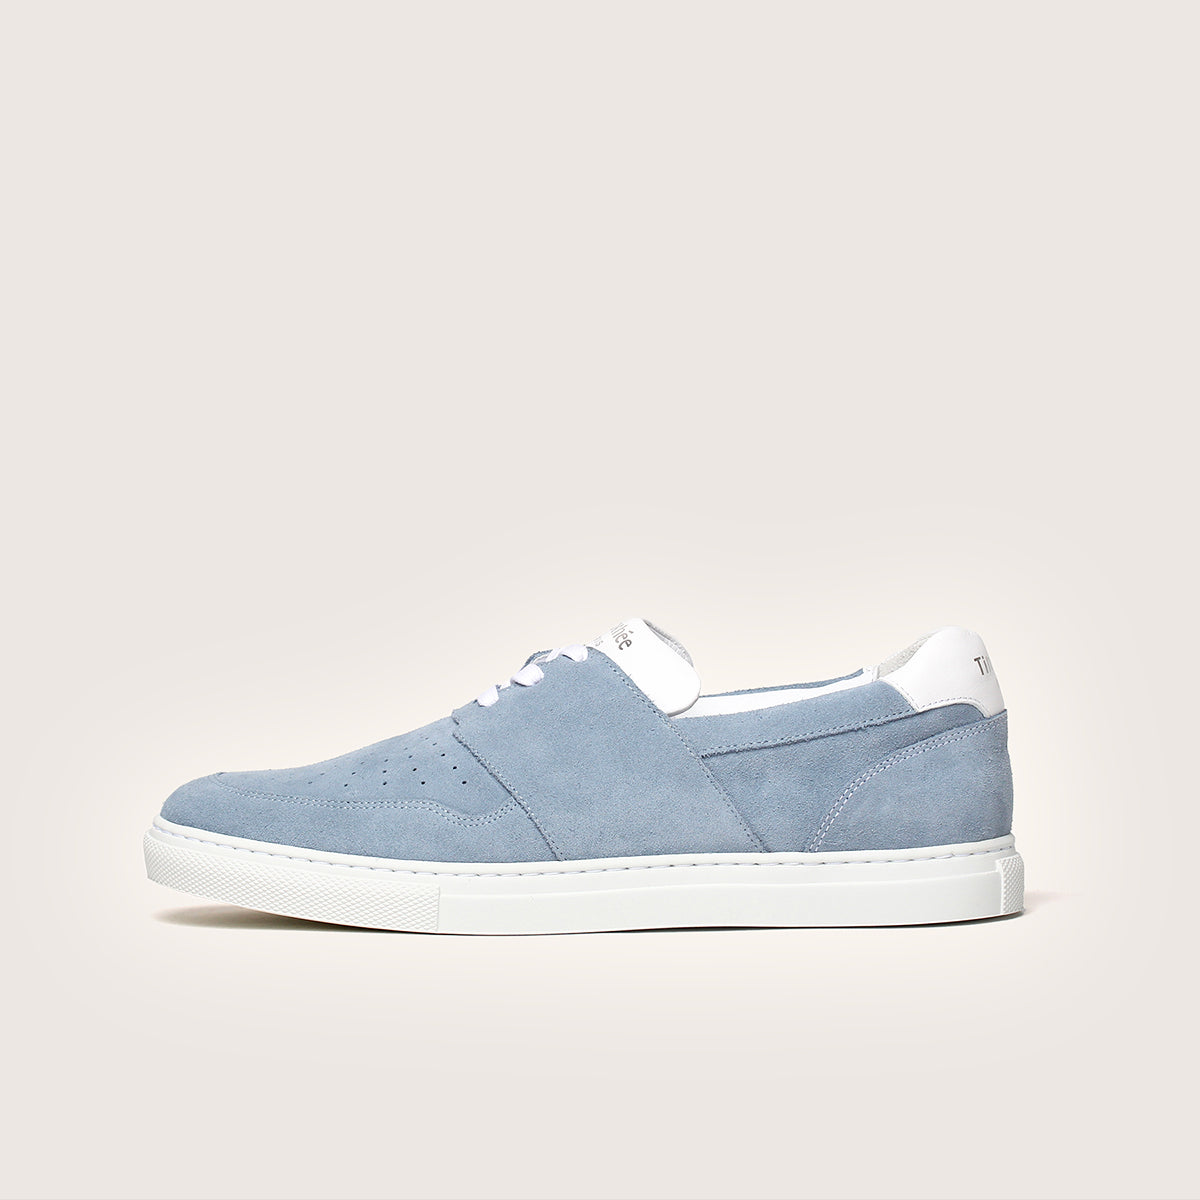 shoes-pyla-suede-leather-lagoon-timothee-paris-profile-view-little-size-picture